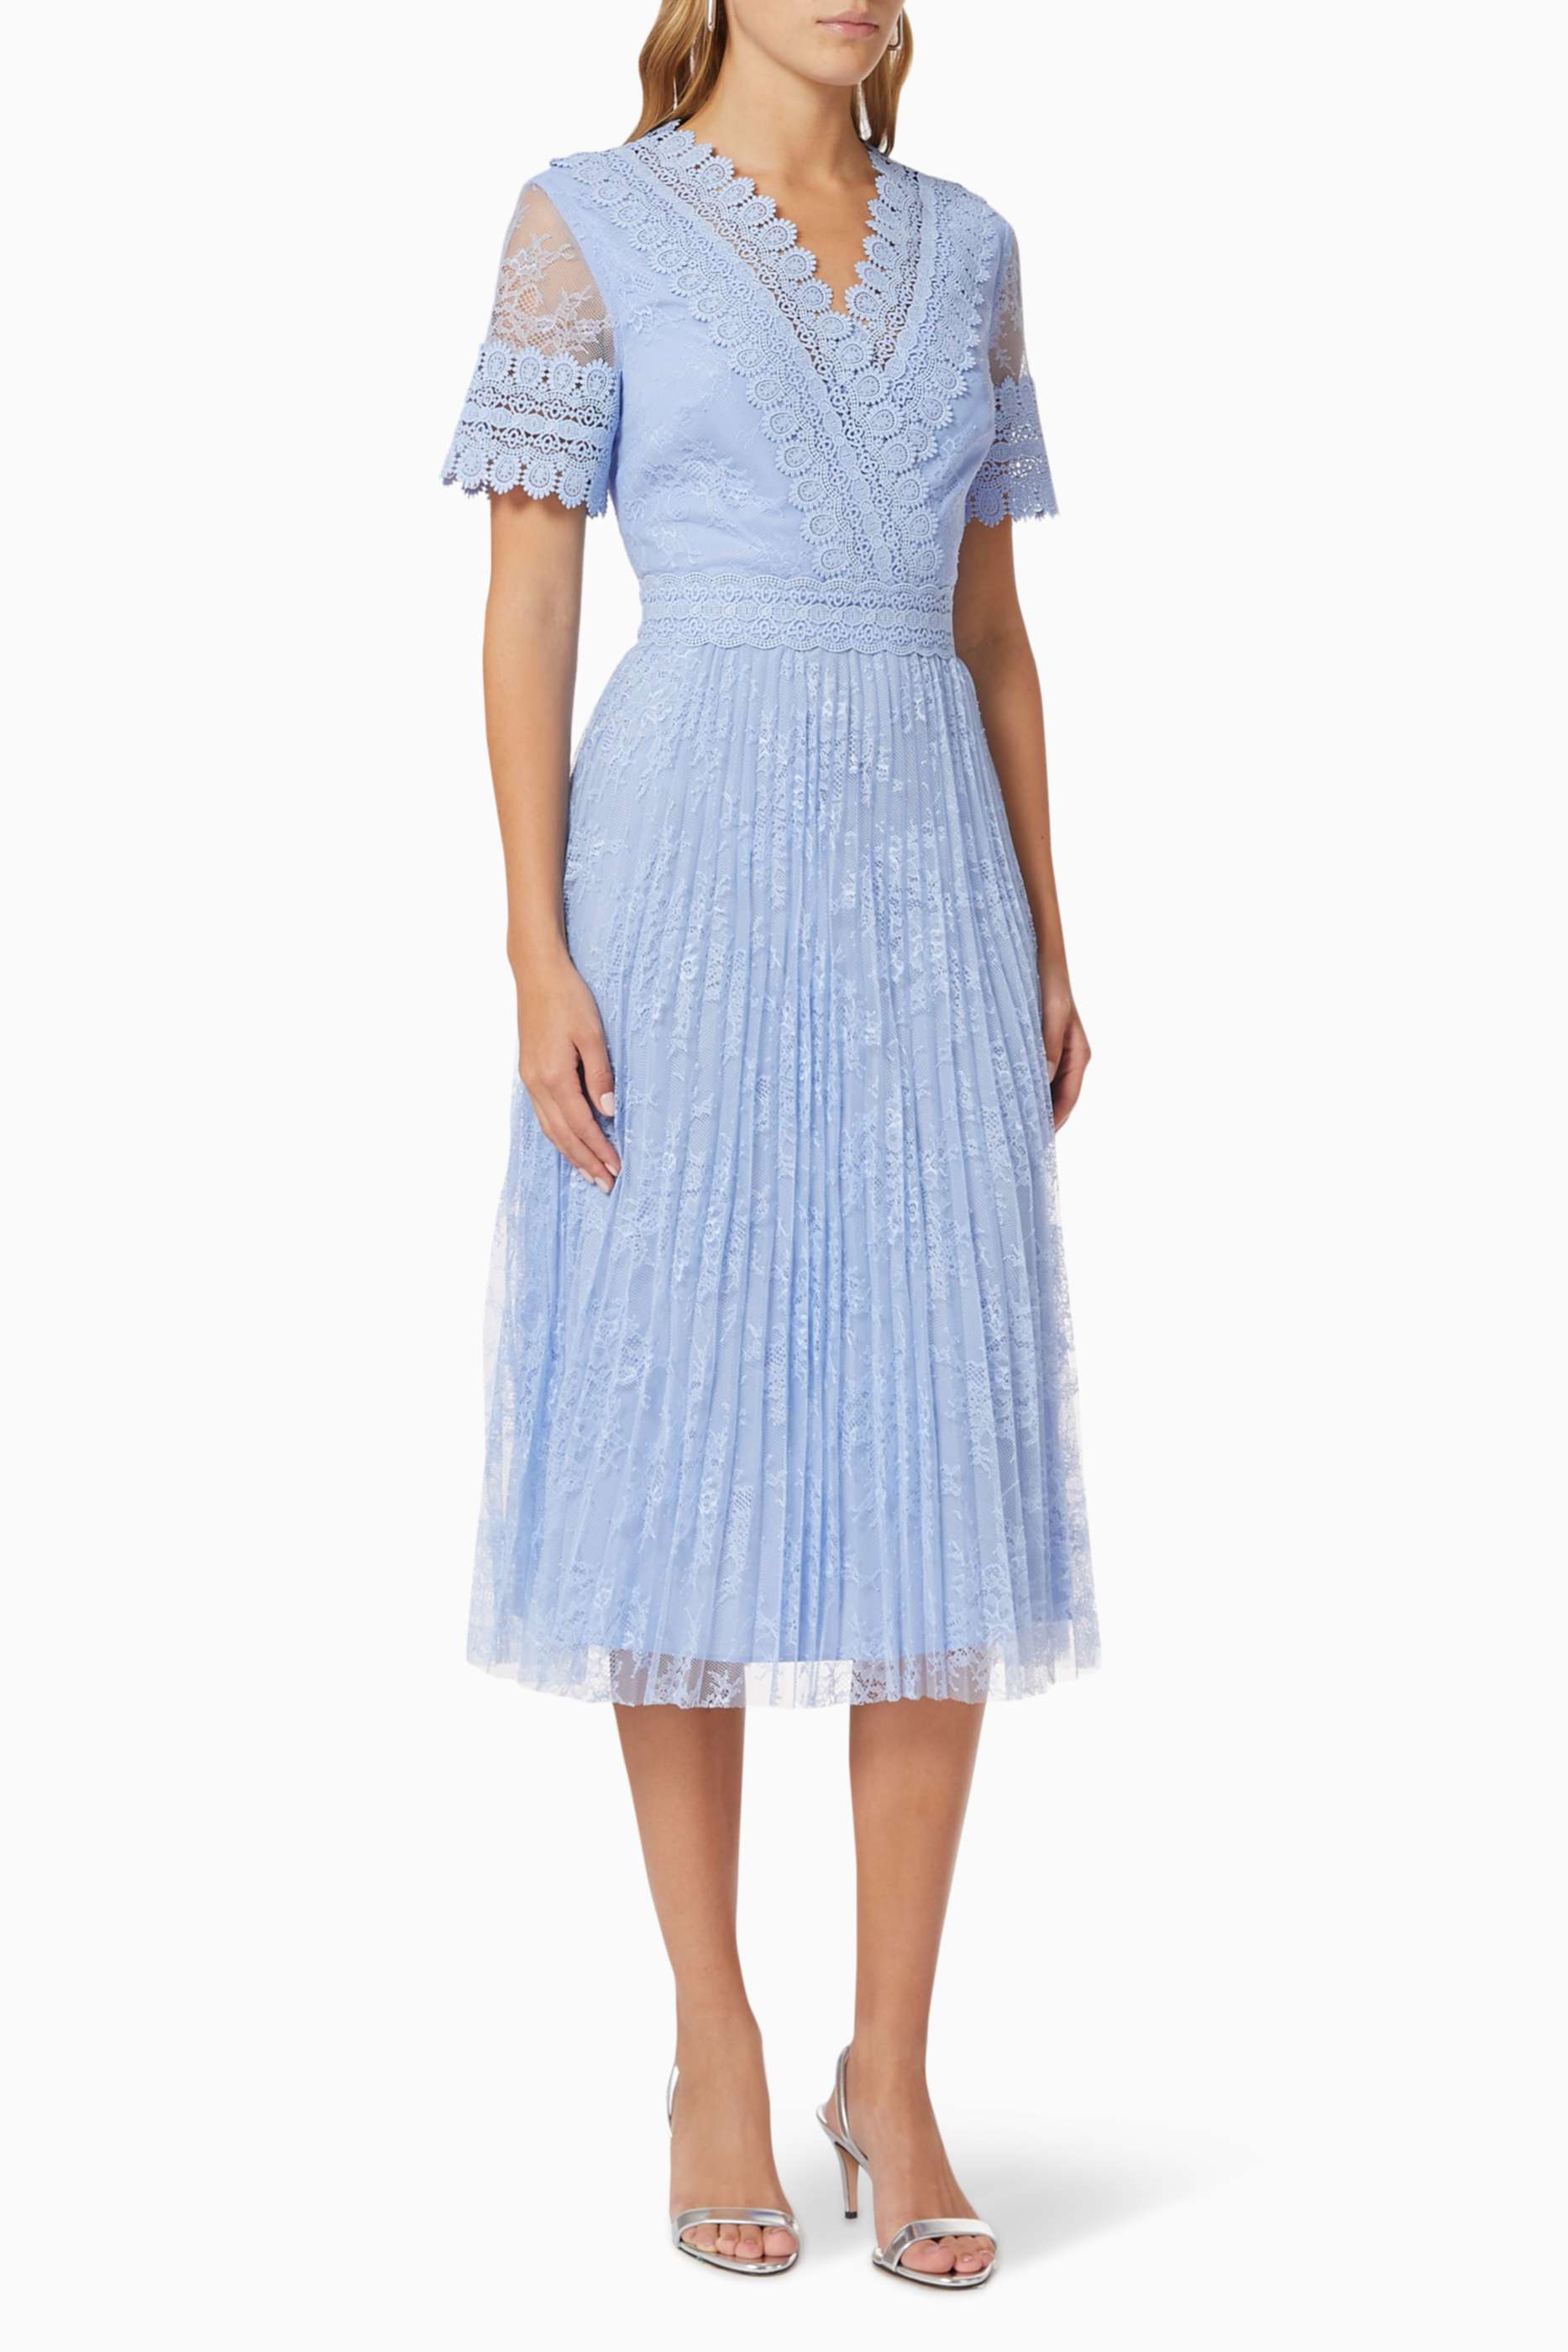 Shop Ted Baker Blue Sonyyia Dress in ...